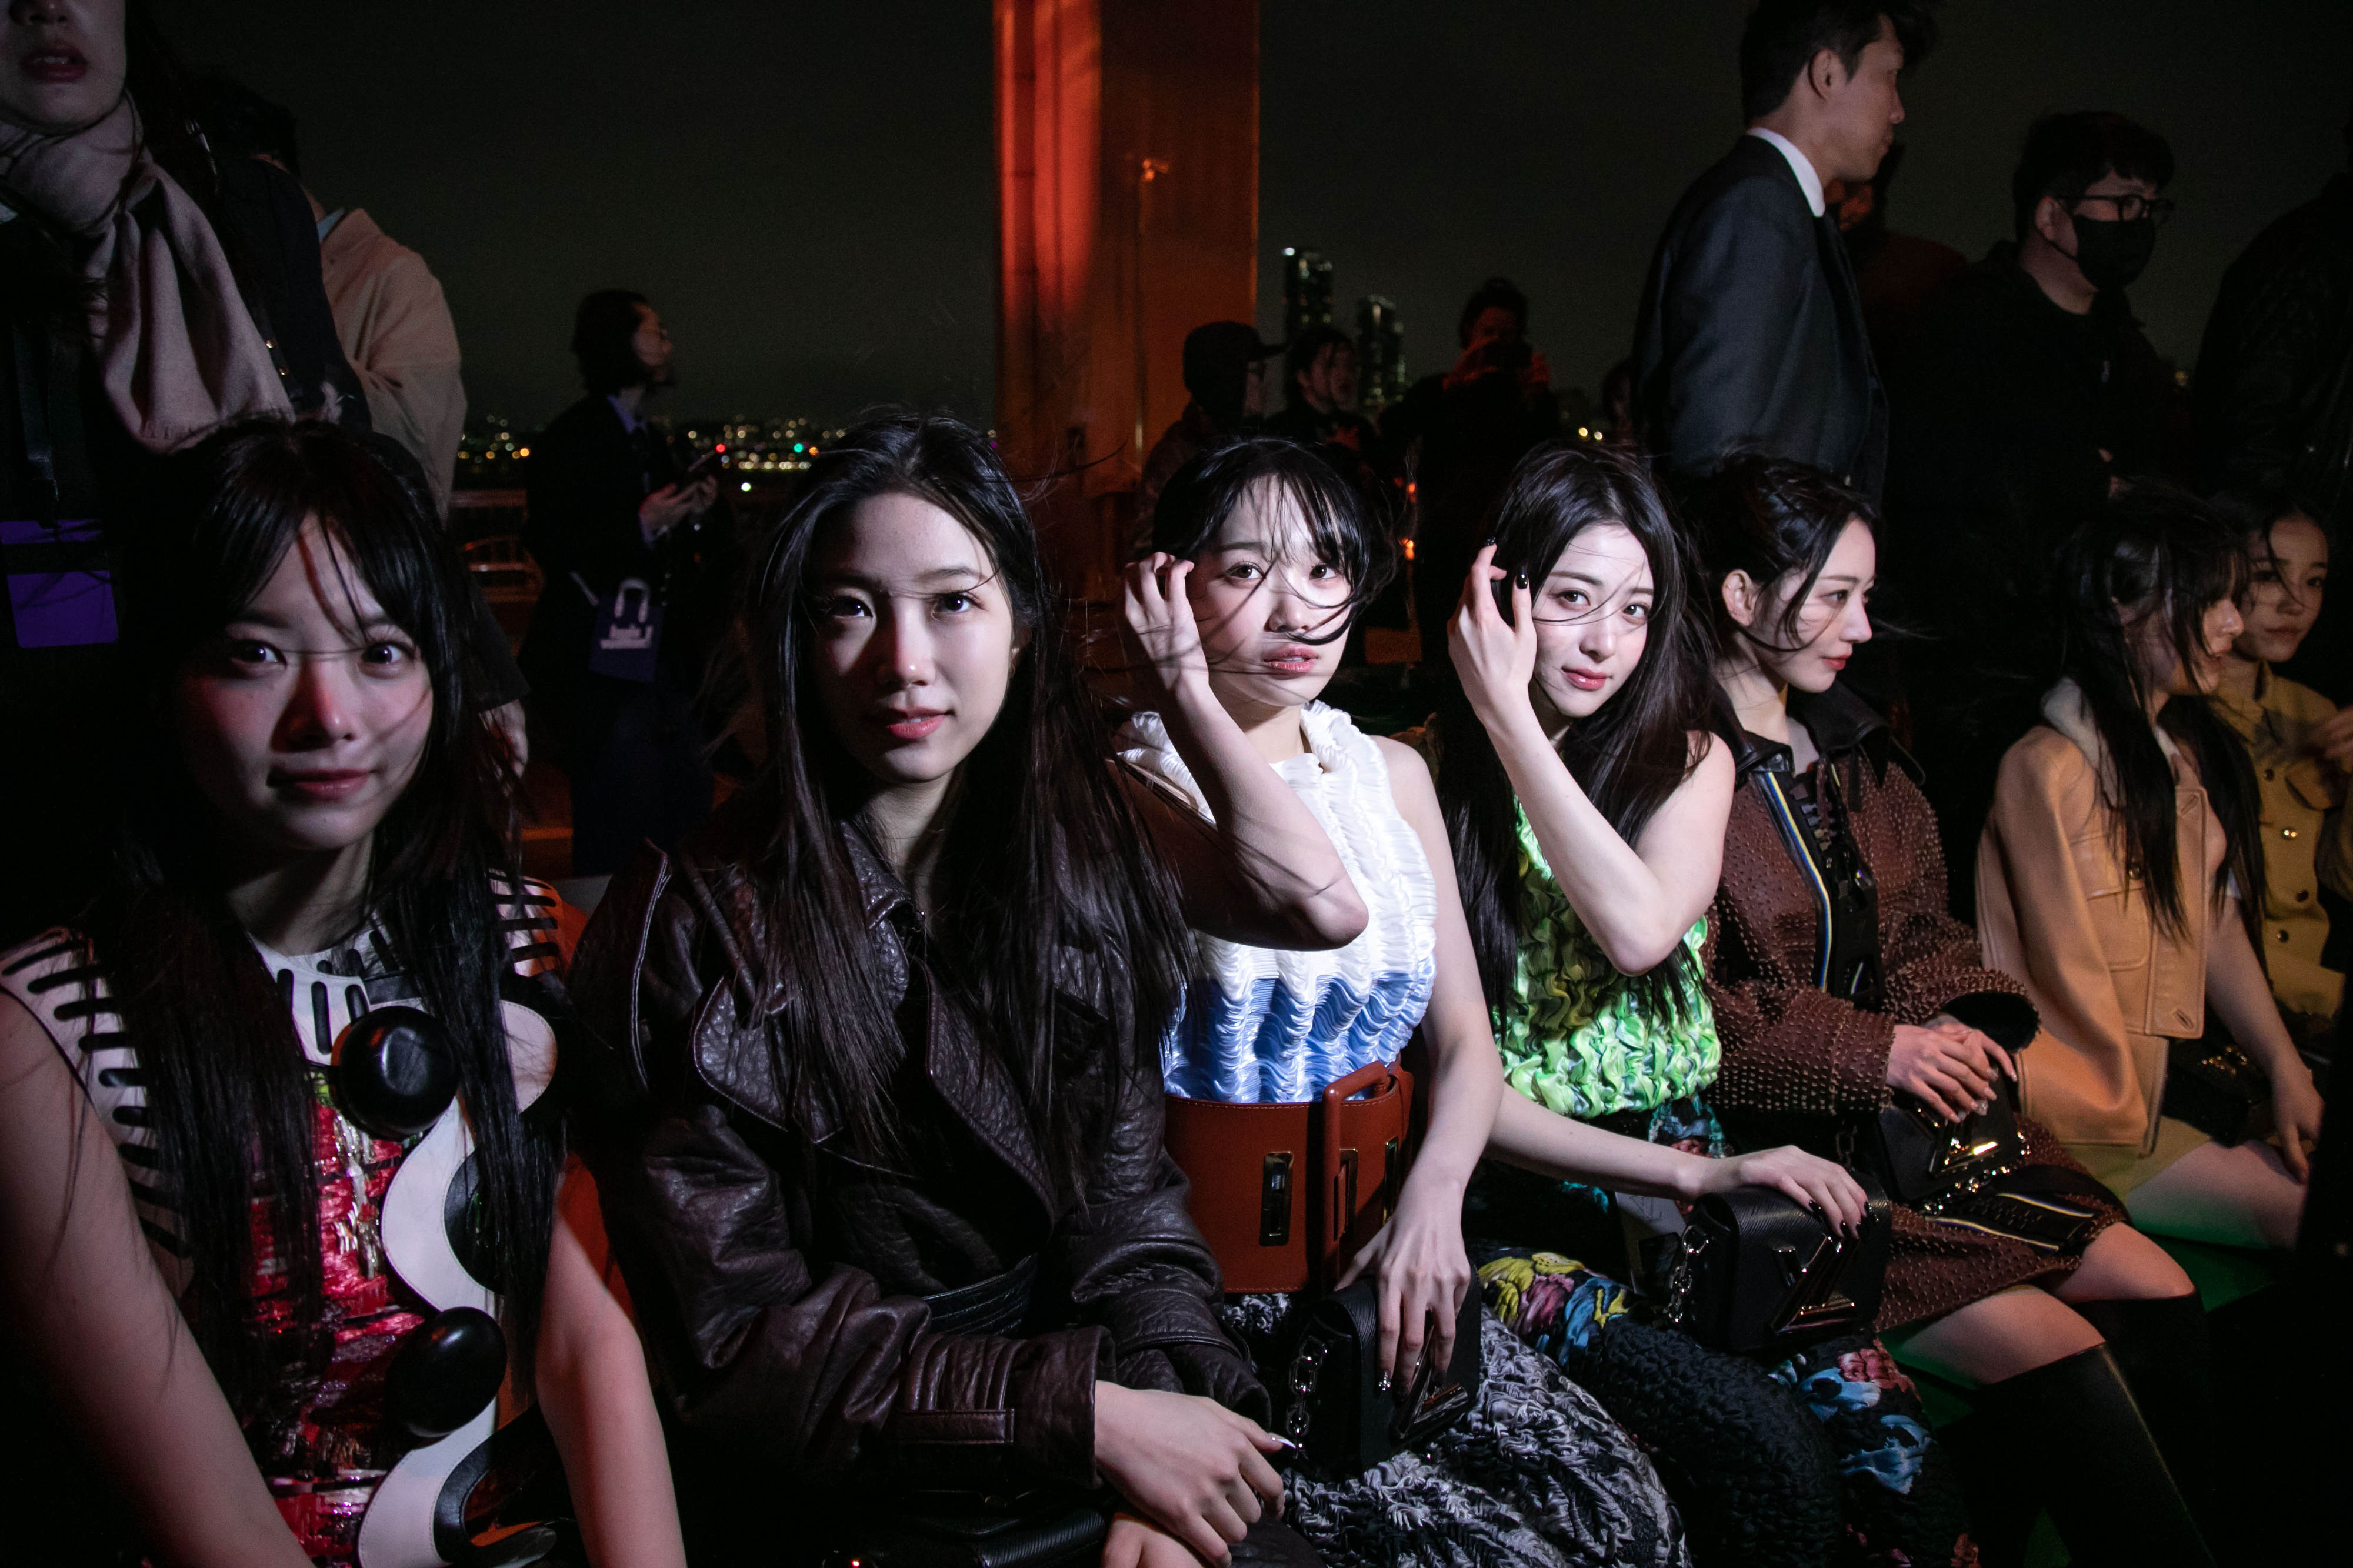 Louis Vuitton's Fashion Show in Seoul With K-Pop, Squid Game